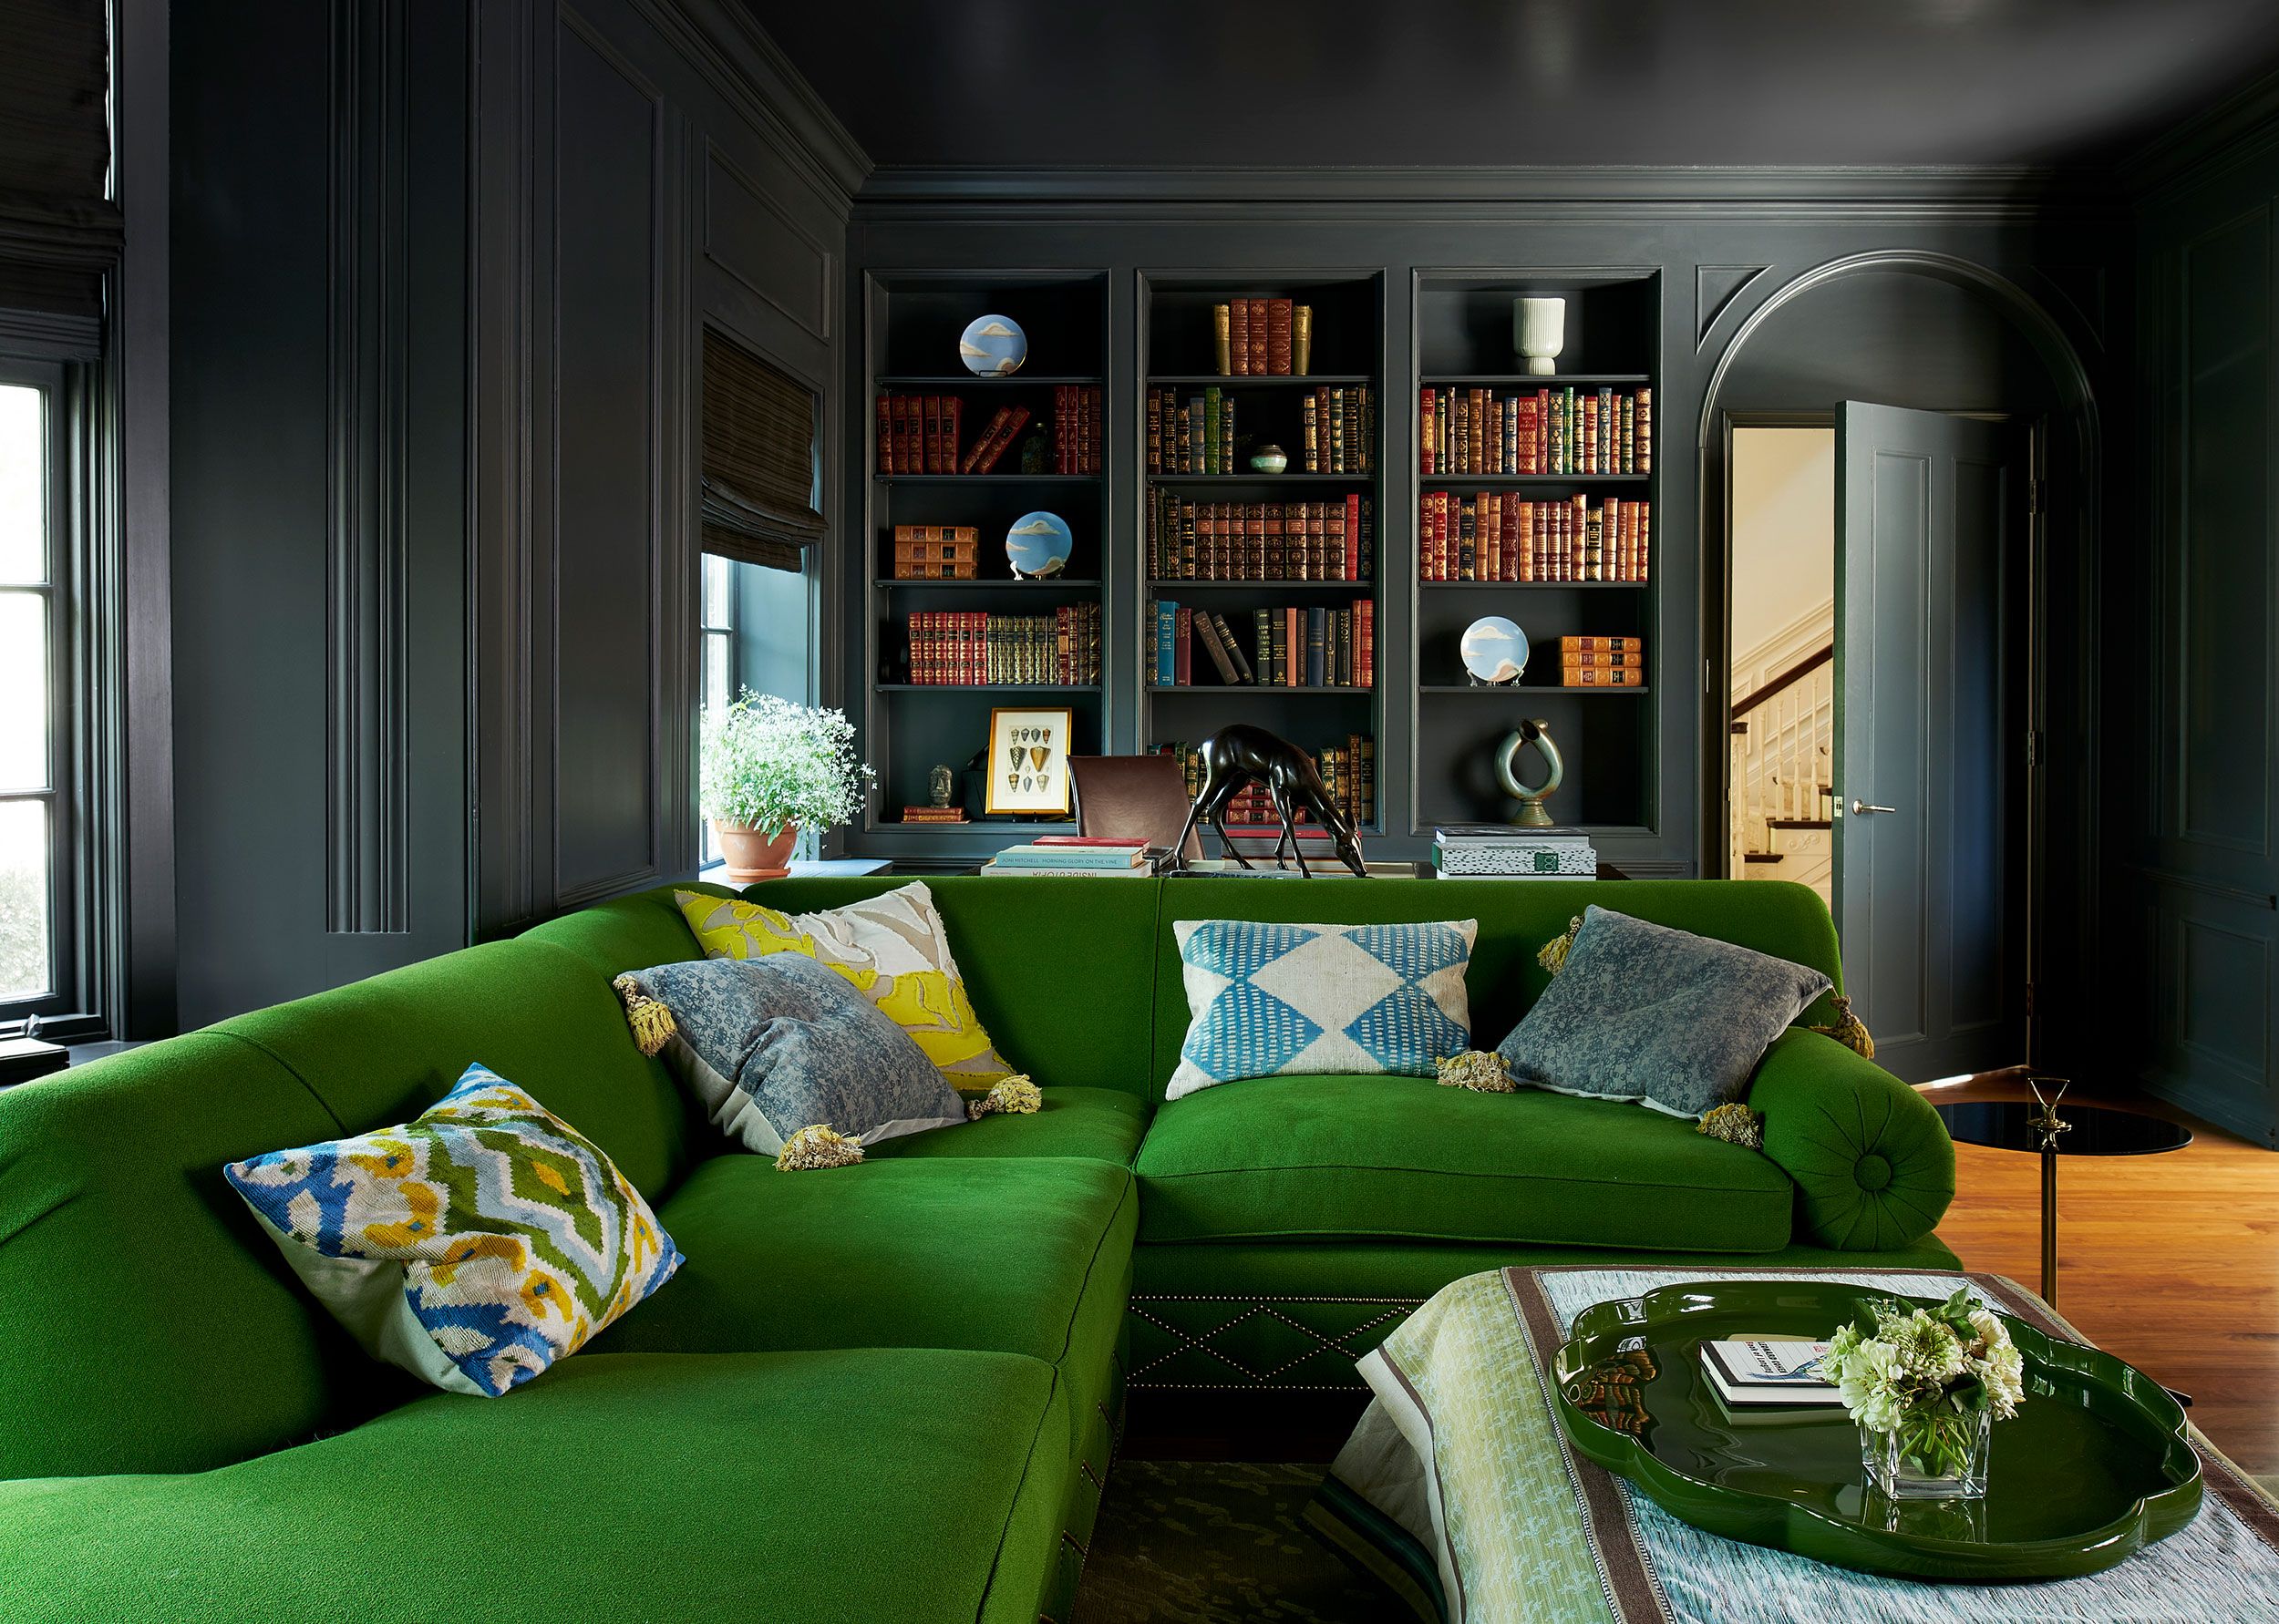 8 Sensational Living Room Ideas To Copy From Architectural Digest